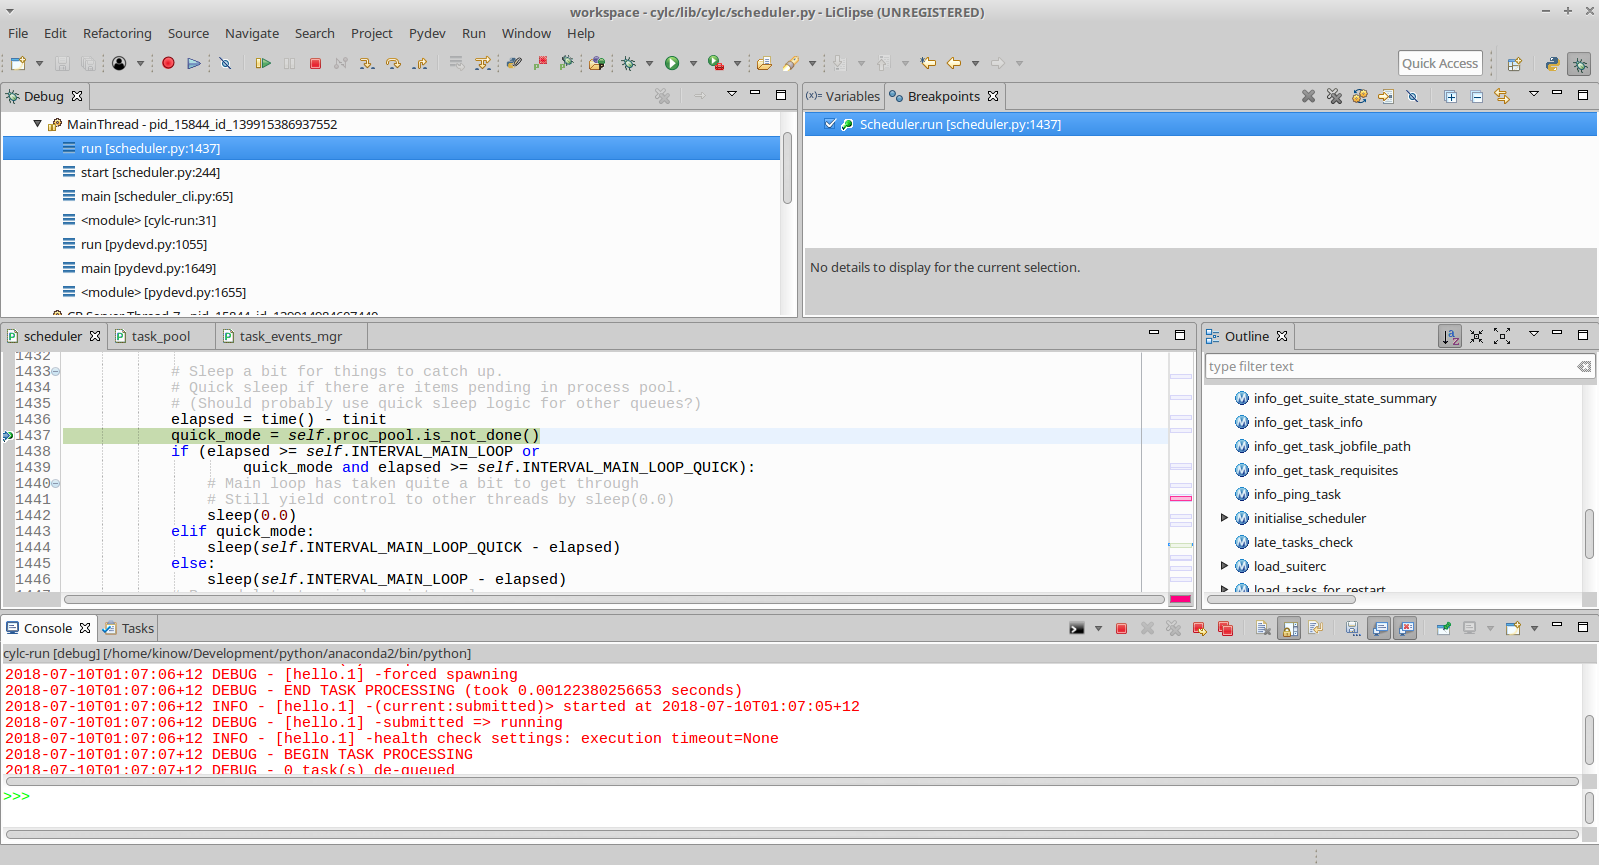 A screen shot of Eclipse with source code